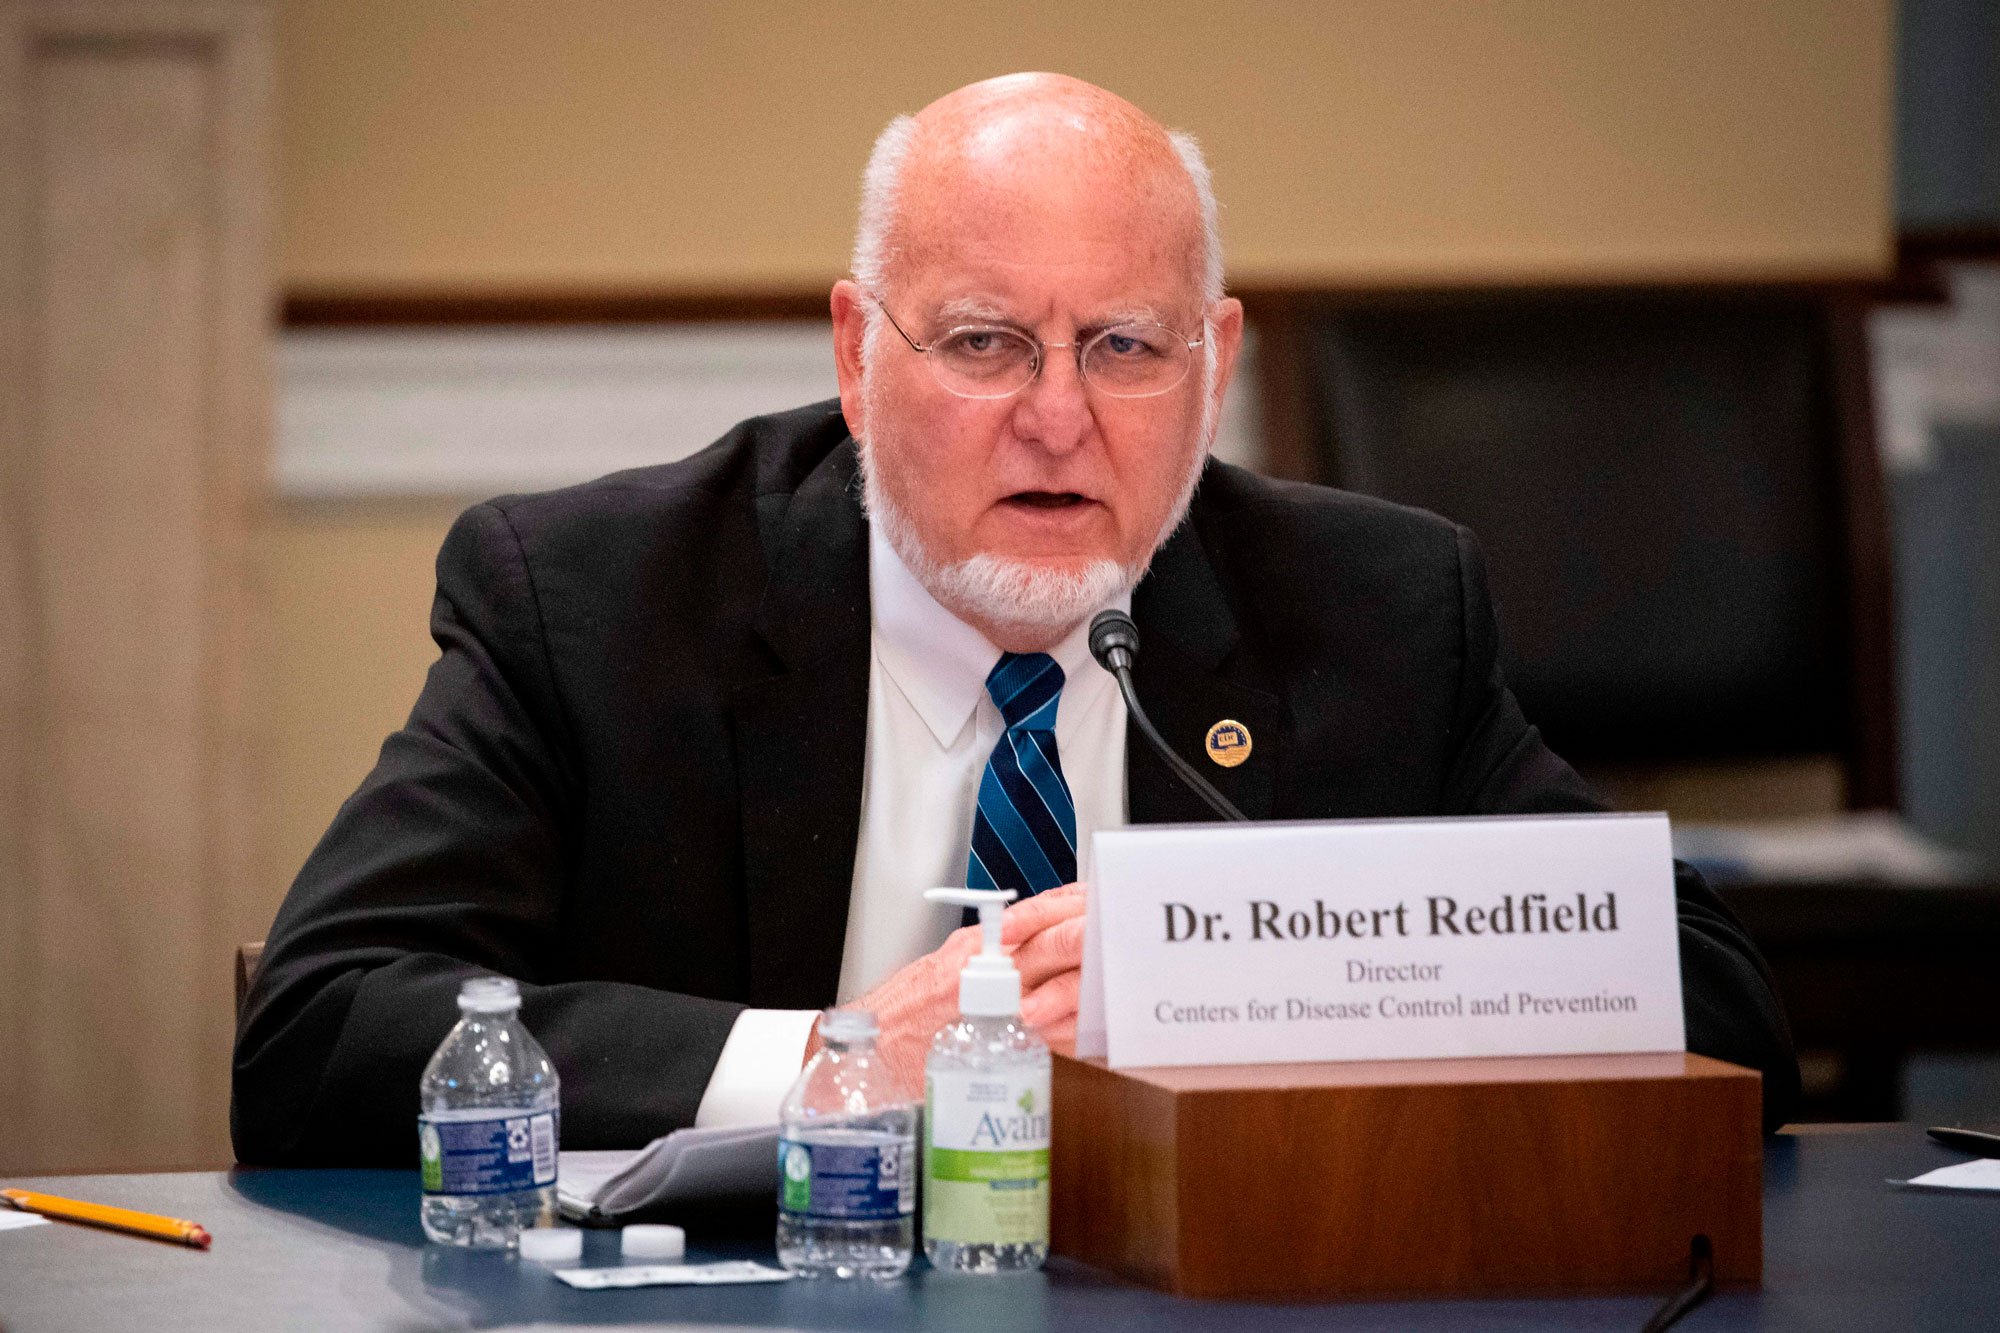 Robert Redfield, director of the Centers for Disease Control and Prevention (CDC), attends a House Appropriations Subcommittee hearing on "COVID-19 Response" on Capitol Hill in Washington on June 4.